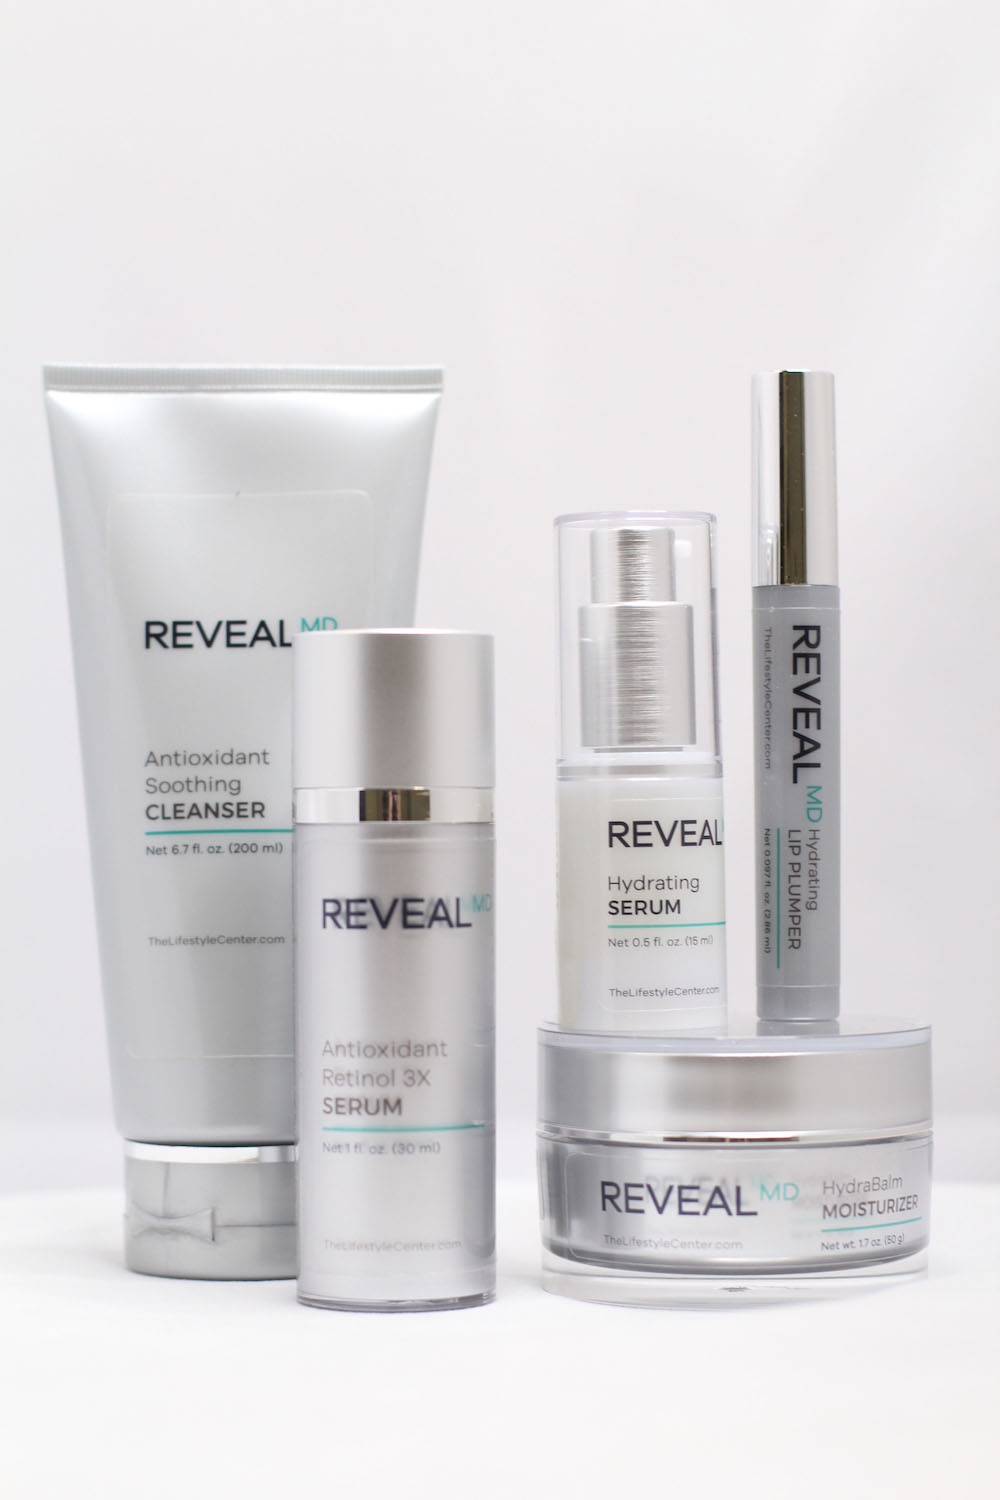 Medical-Grade Skincare Products in St. Louis | The Lifestyle Center